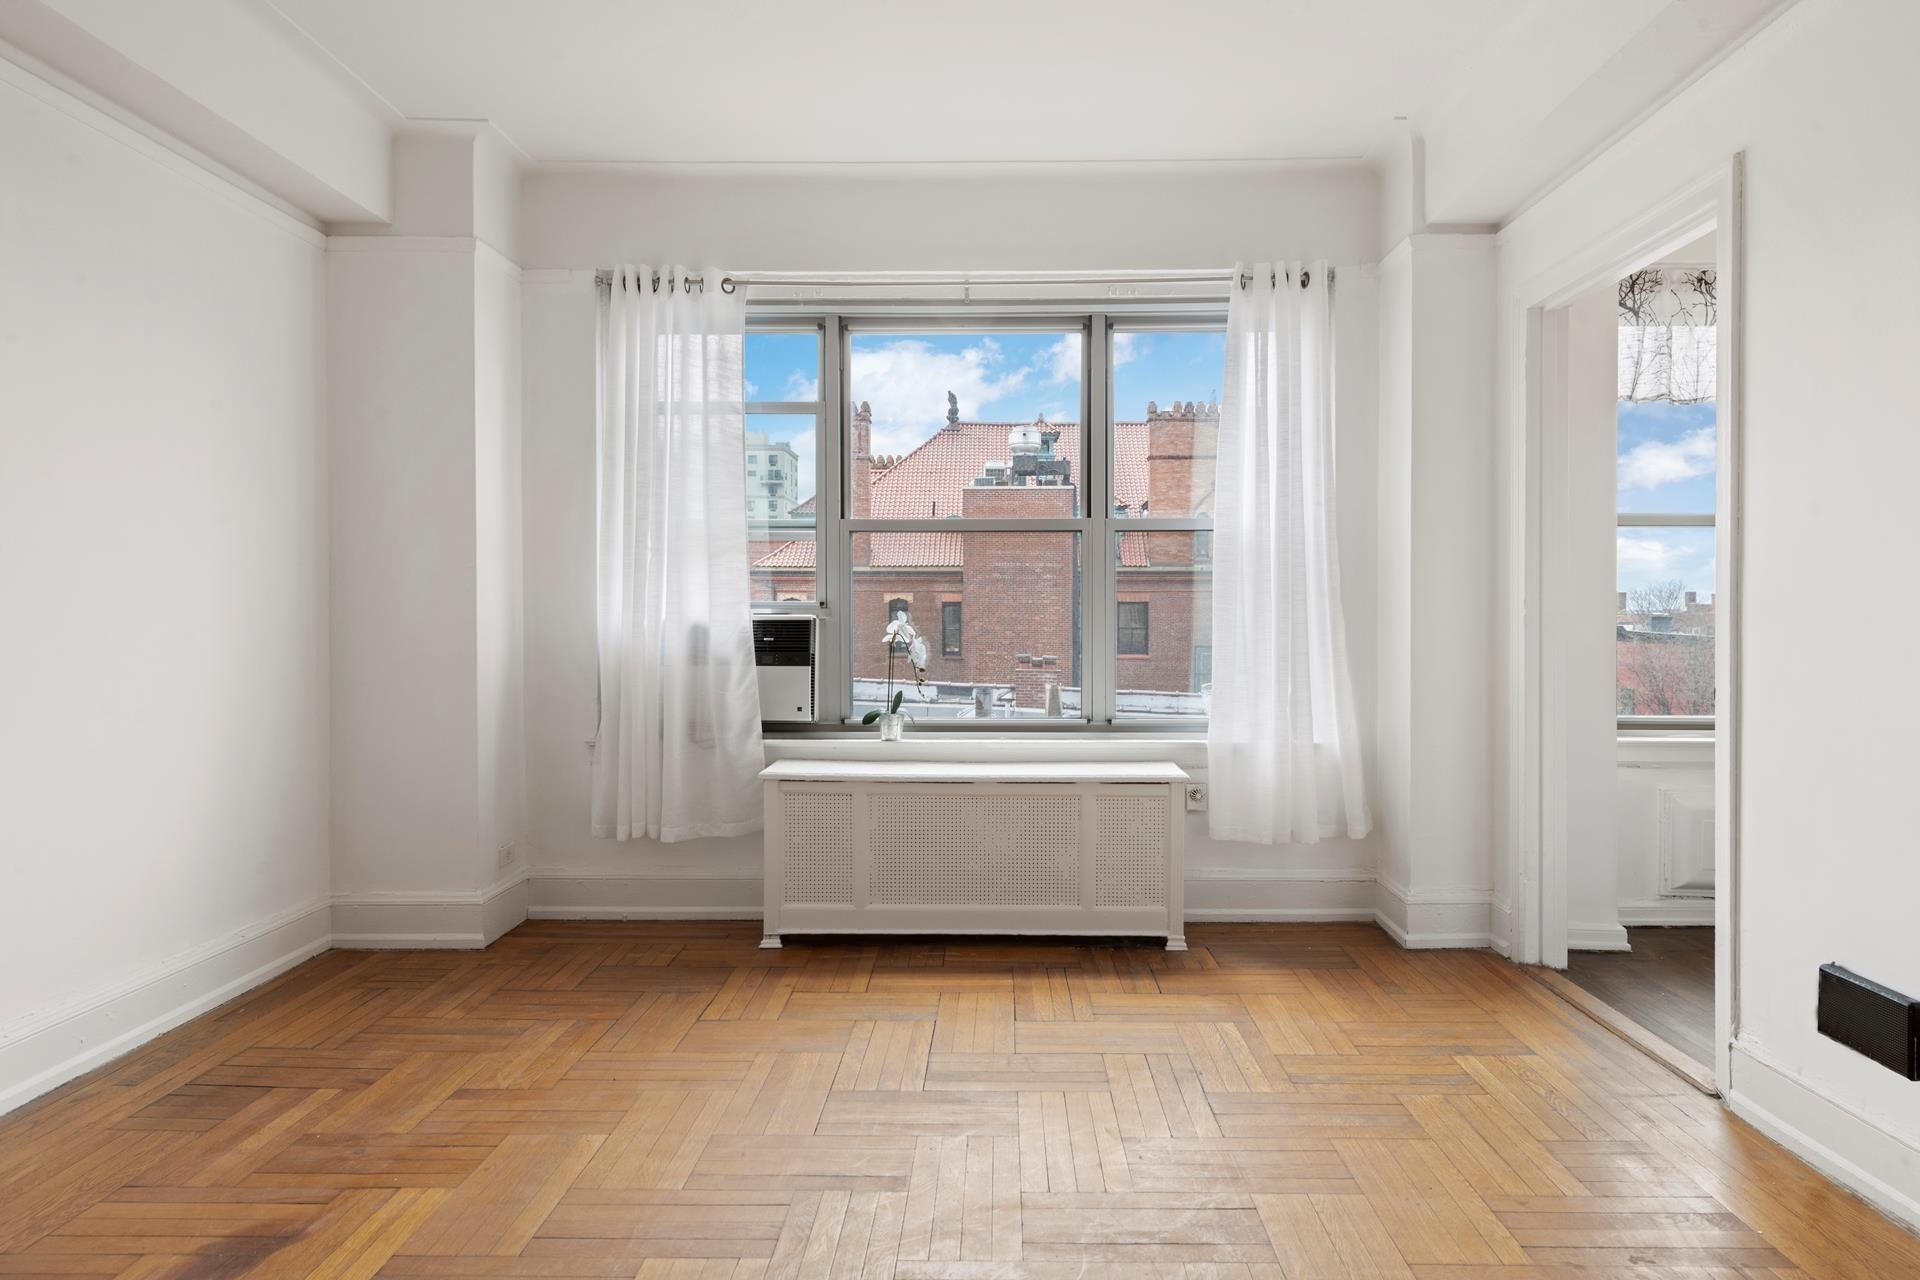 Co-op Properties for Sale at 1 PLAZA ST W, 6B Park Slope, Brooklyn, New York 11217